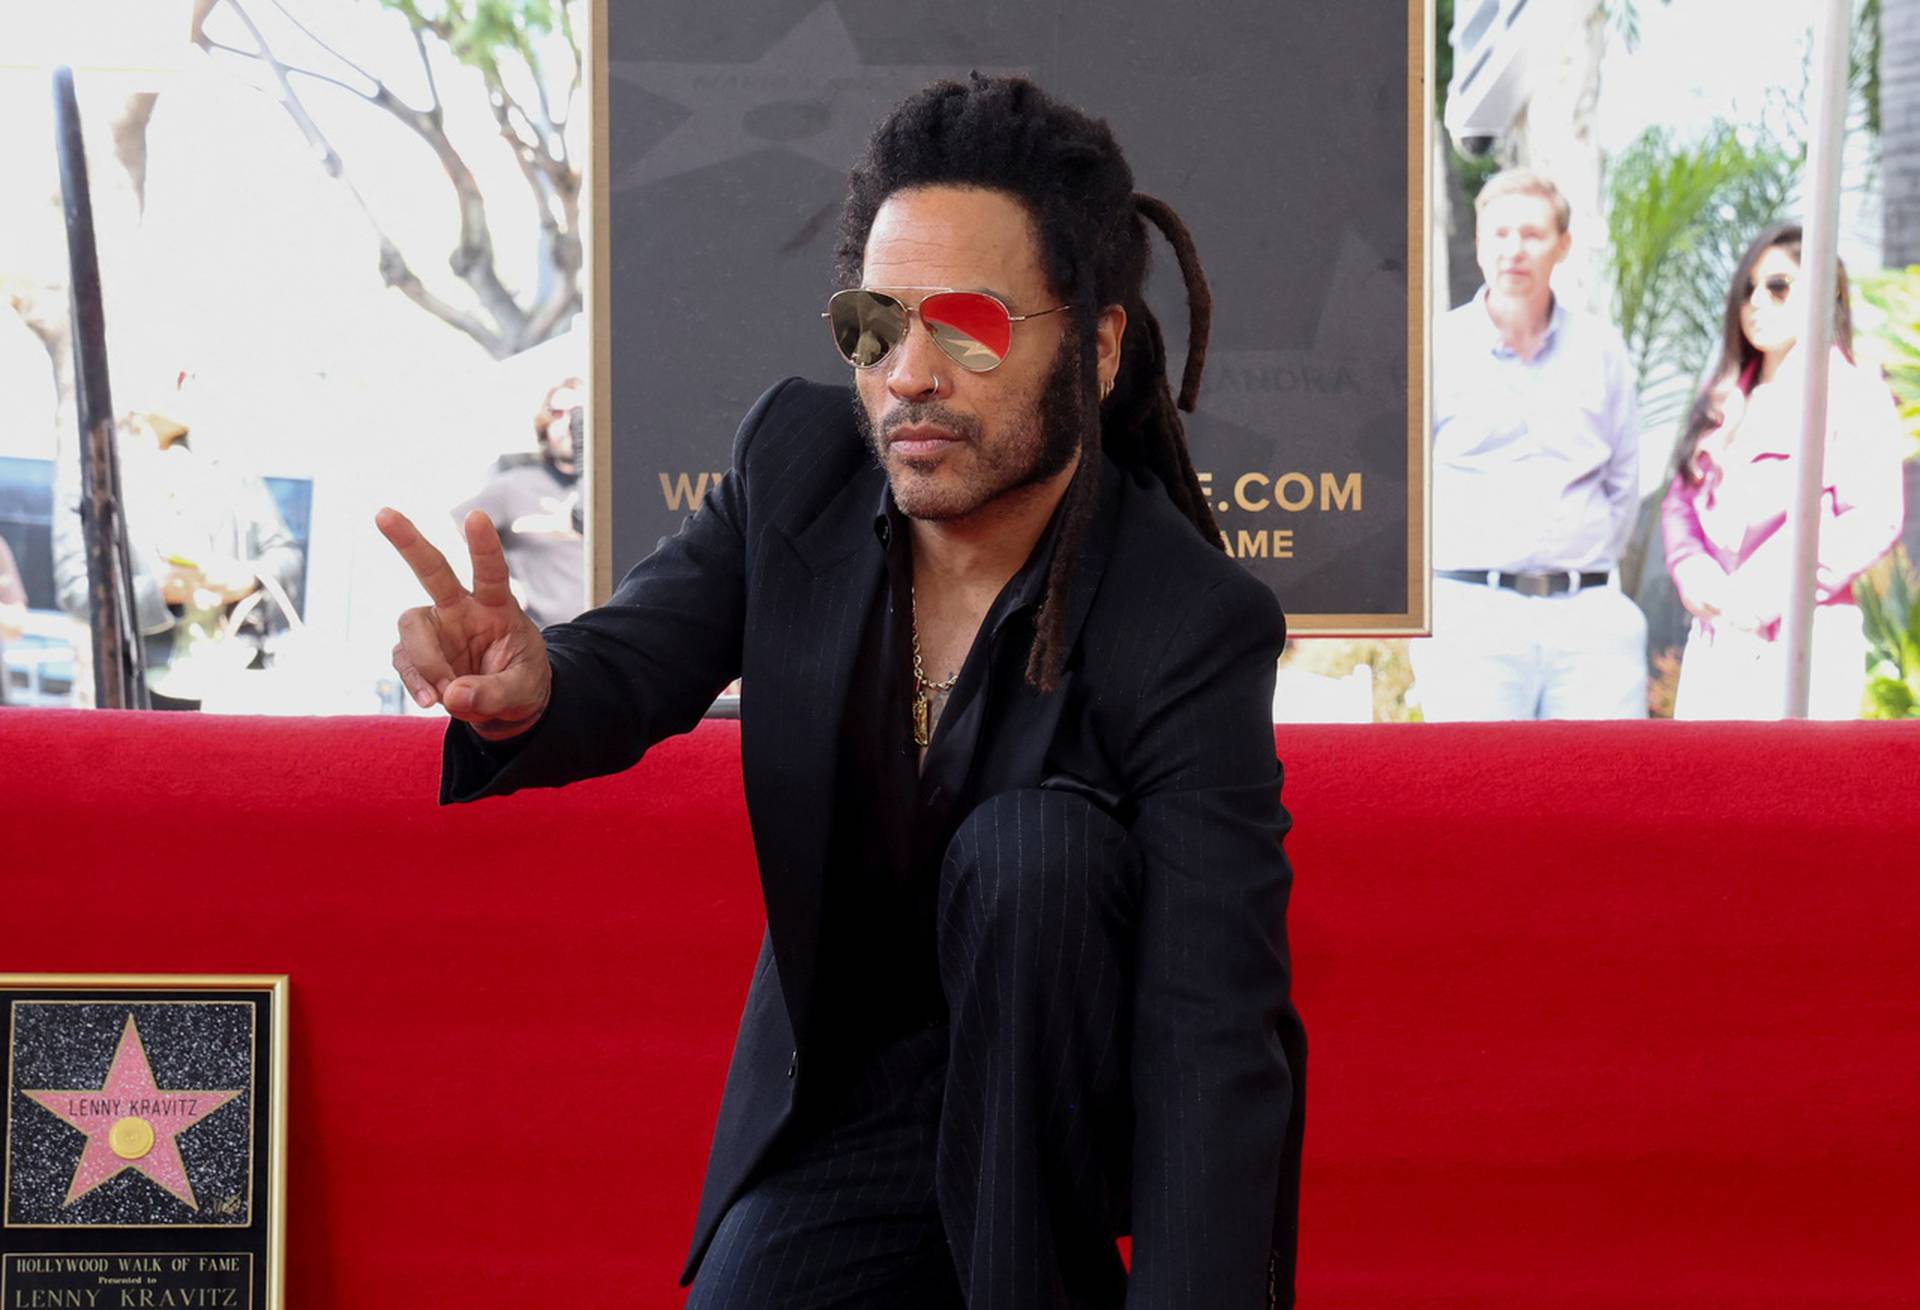 Singer-songwriter Lenny Kravitz unveils his star on the Hollywood Walk of Fame in Los Angeles